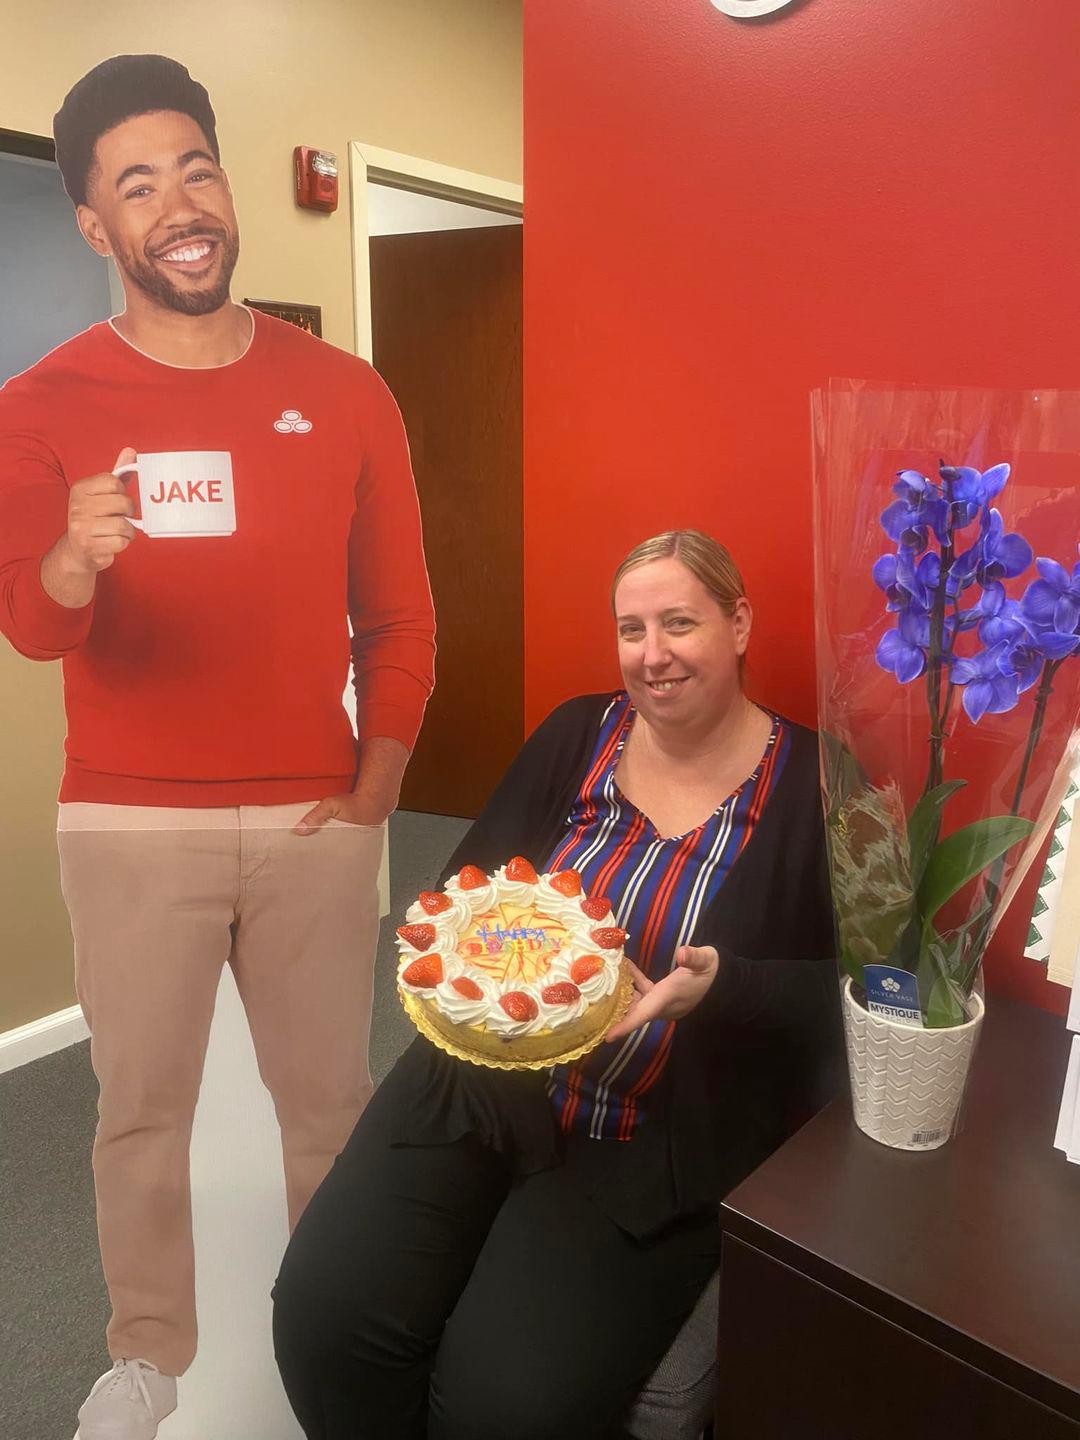 Join us in wishing Julie a Happy Birthday! We’re so lucky to have her as part of our team! She brings so much positivity and happiness into the office!